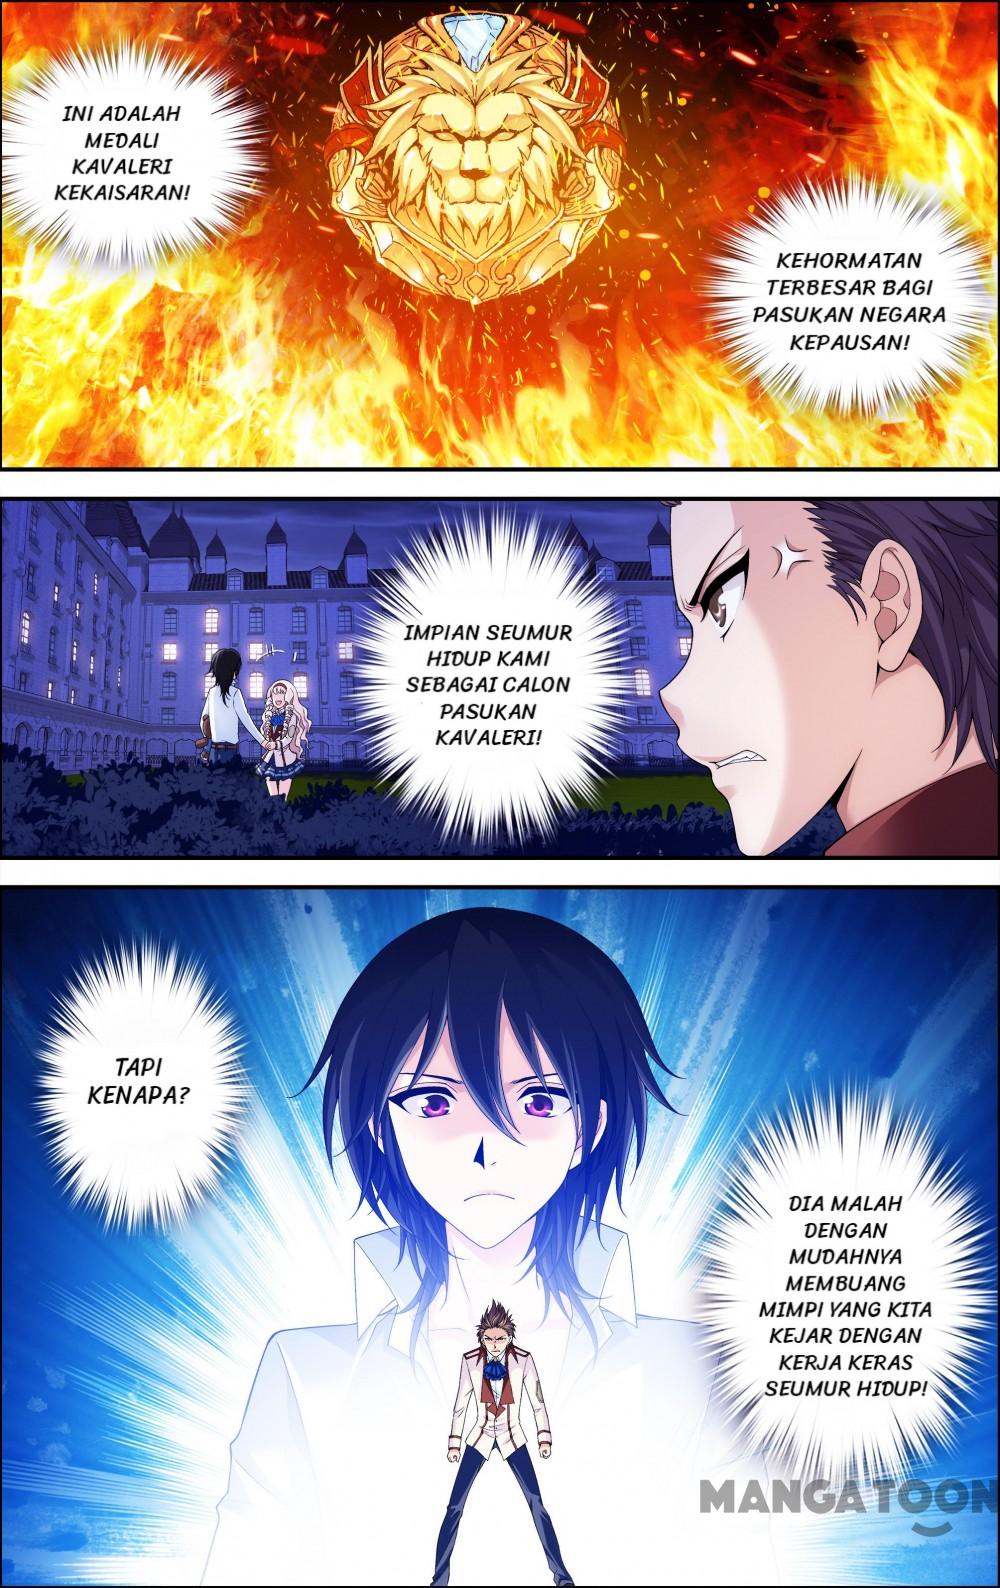 Flaming Heaven: The Dragon returns Chapter 20